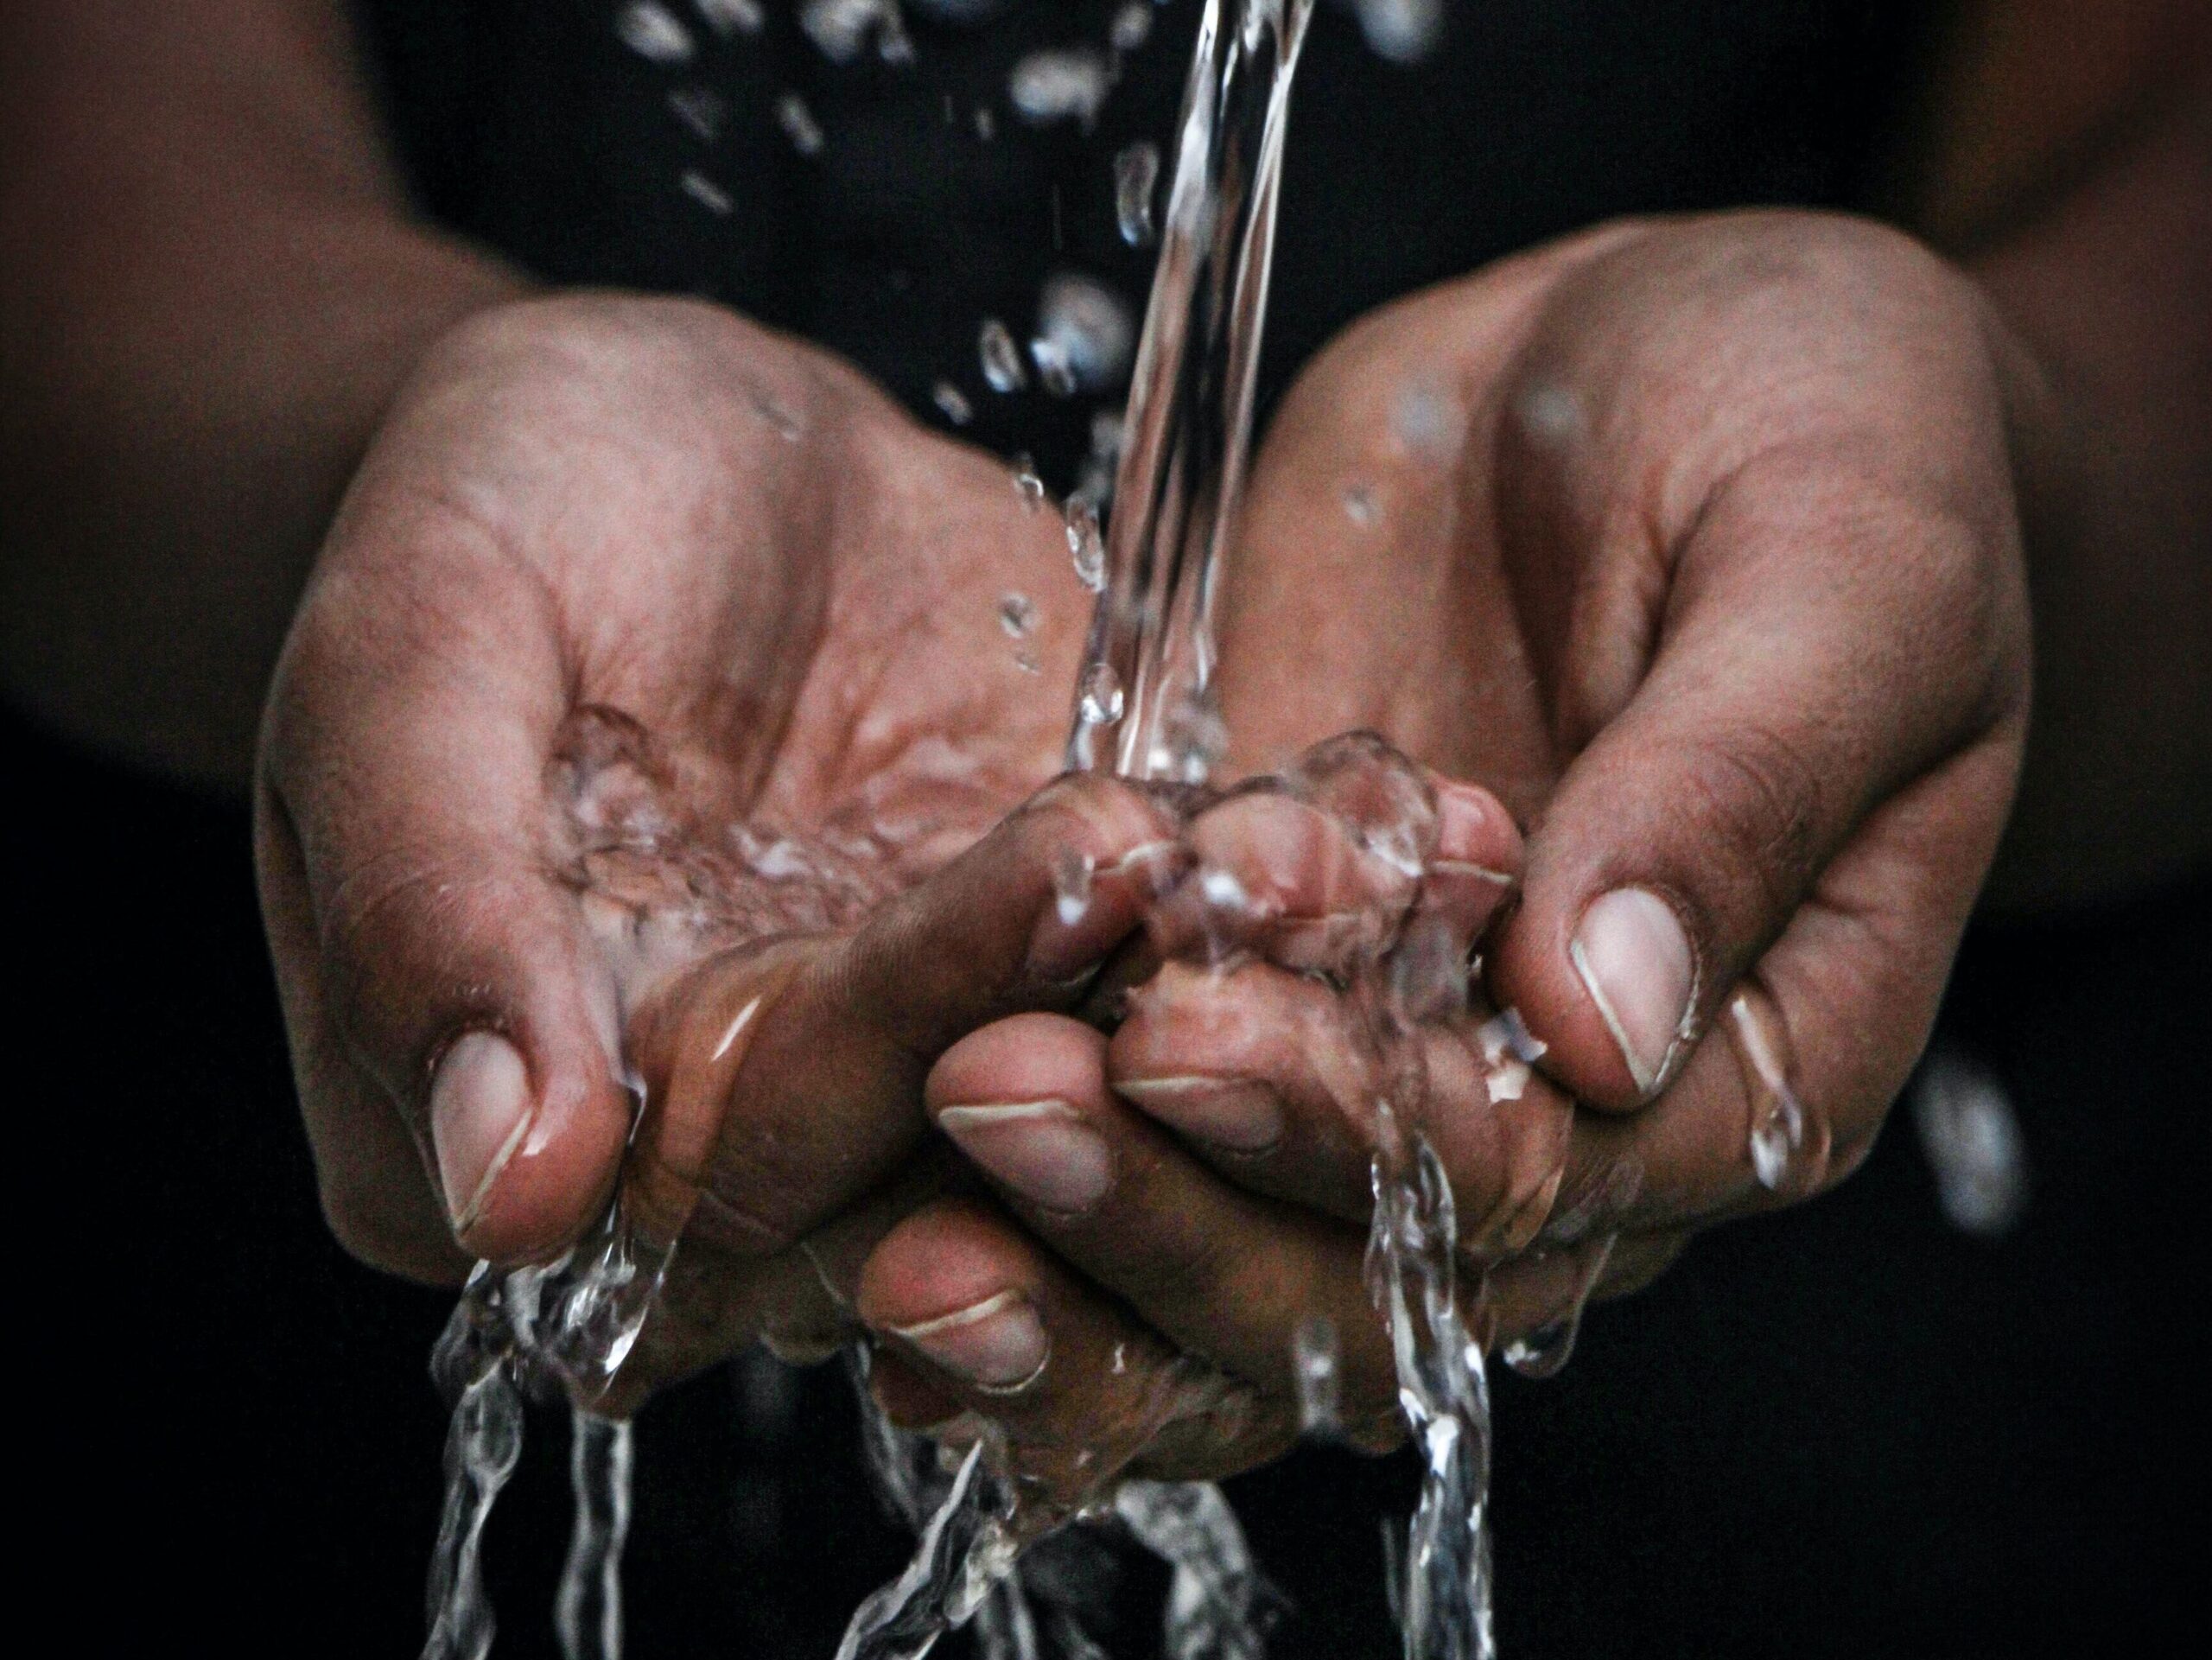 Hands catching stream of clean water